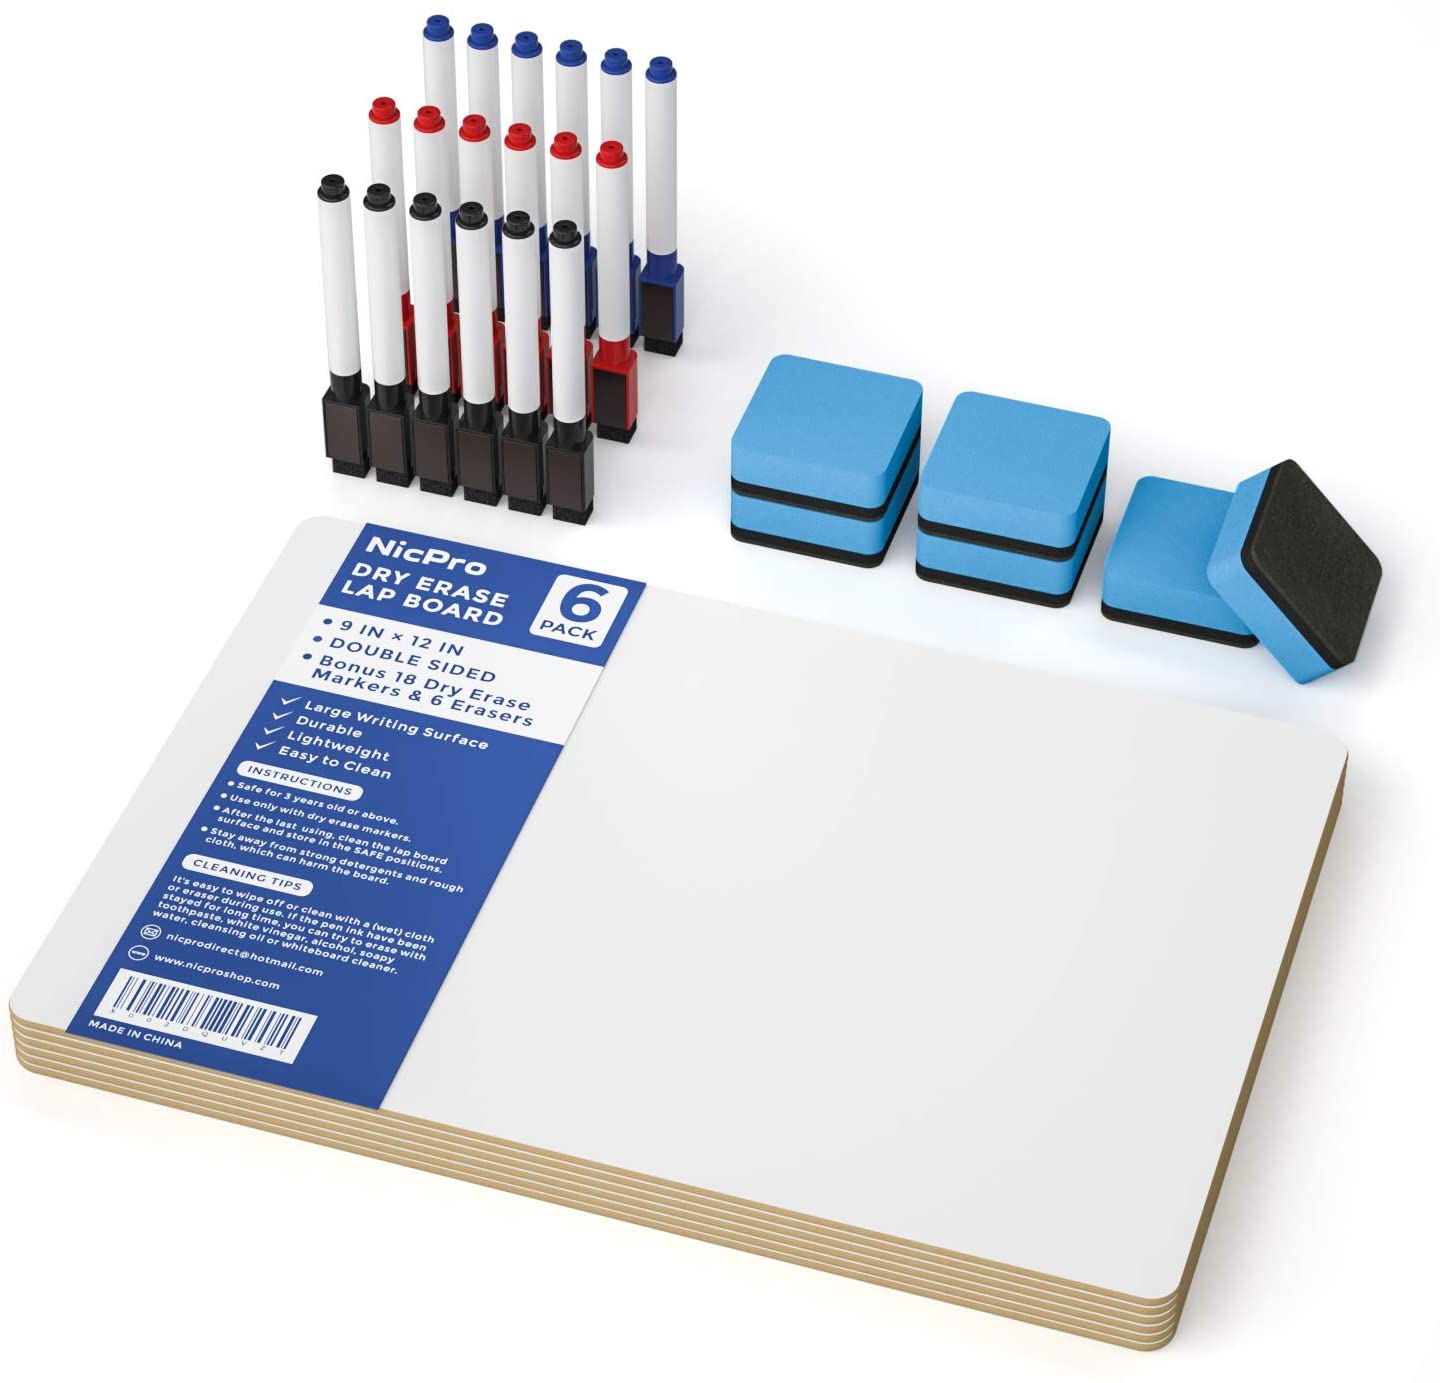 Nicpro (Double-Sided) Lap Whiteboard for Kids & Students - 9 x 12